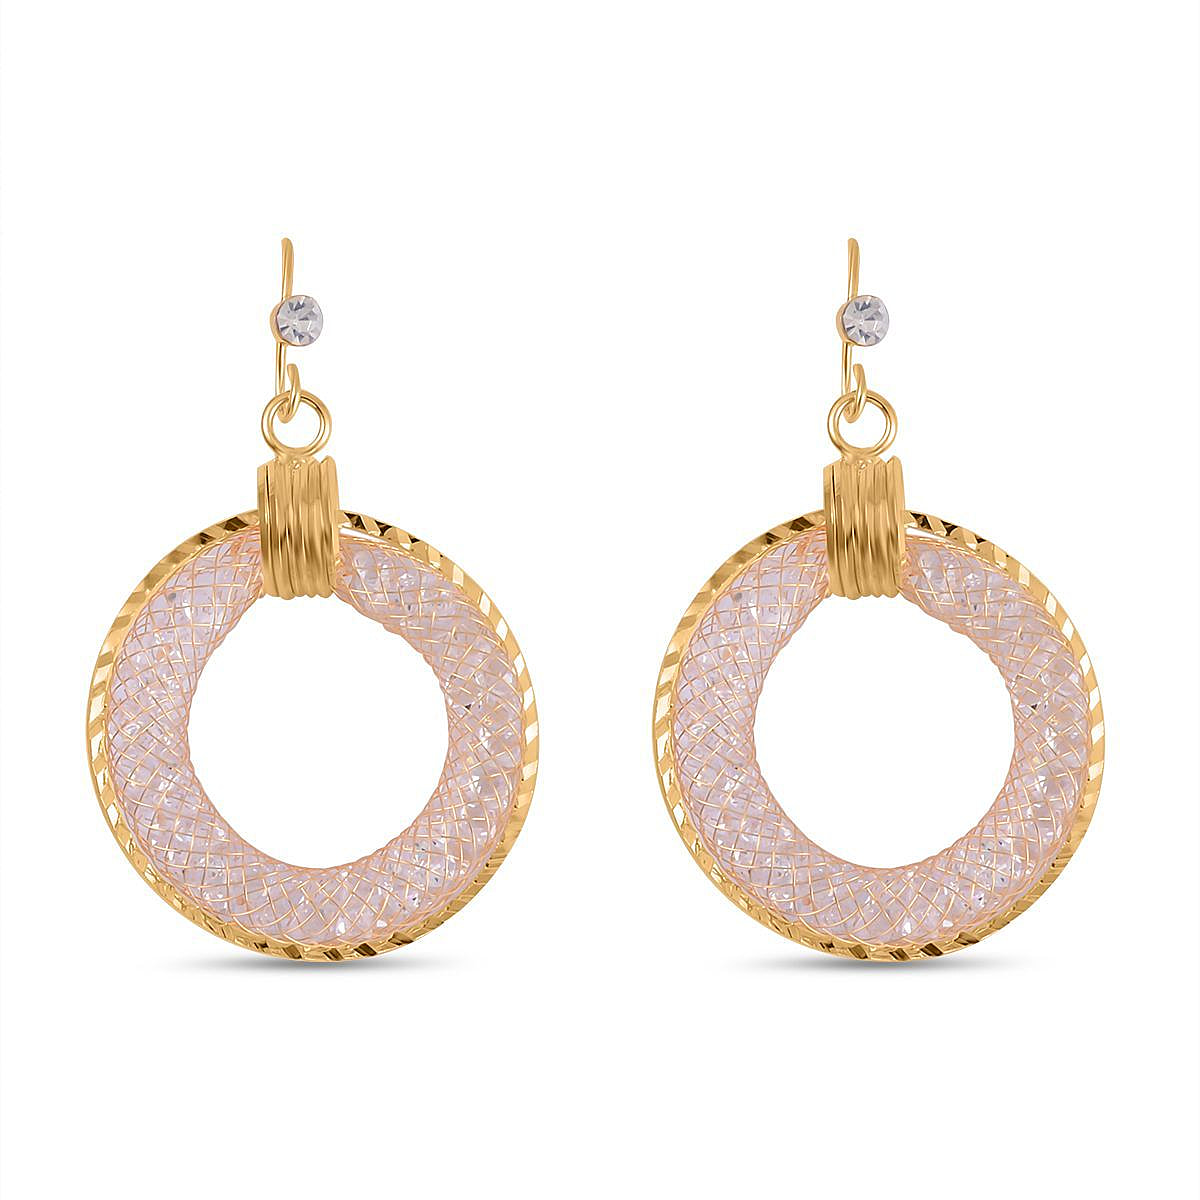 One time Closeout - Star Light Austrian Crystal Circle Earrings - Gold